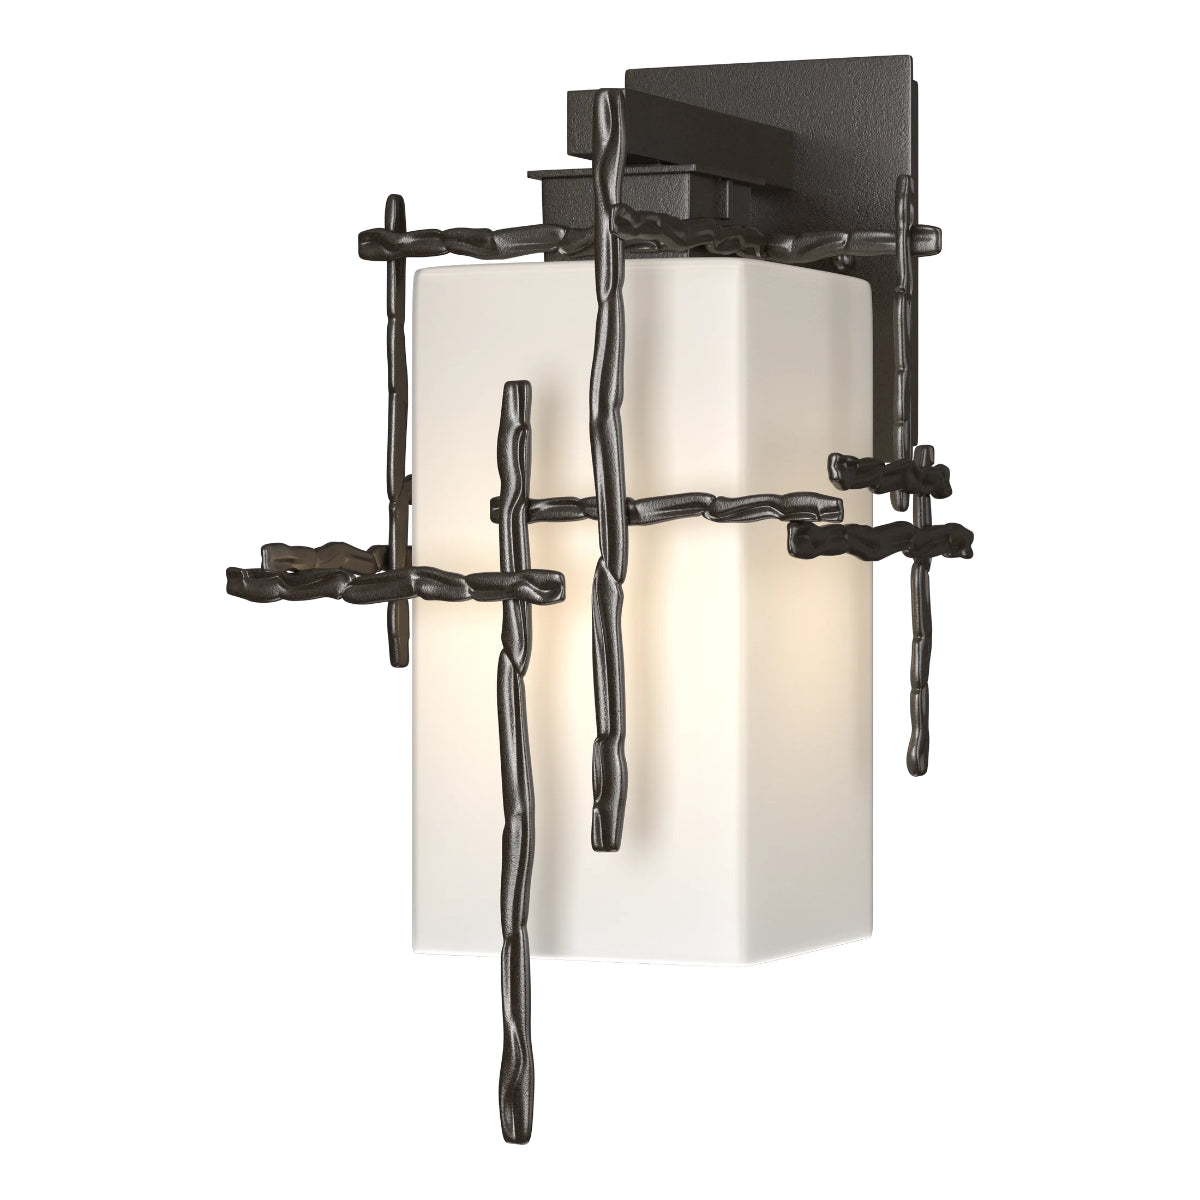 Tura 16 In. Outdoor Wall Sconce